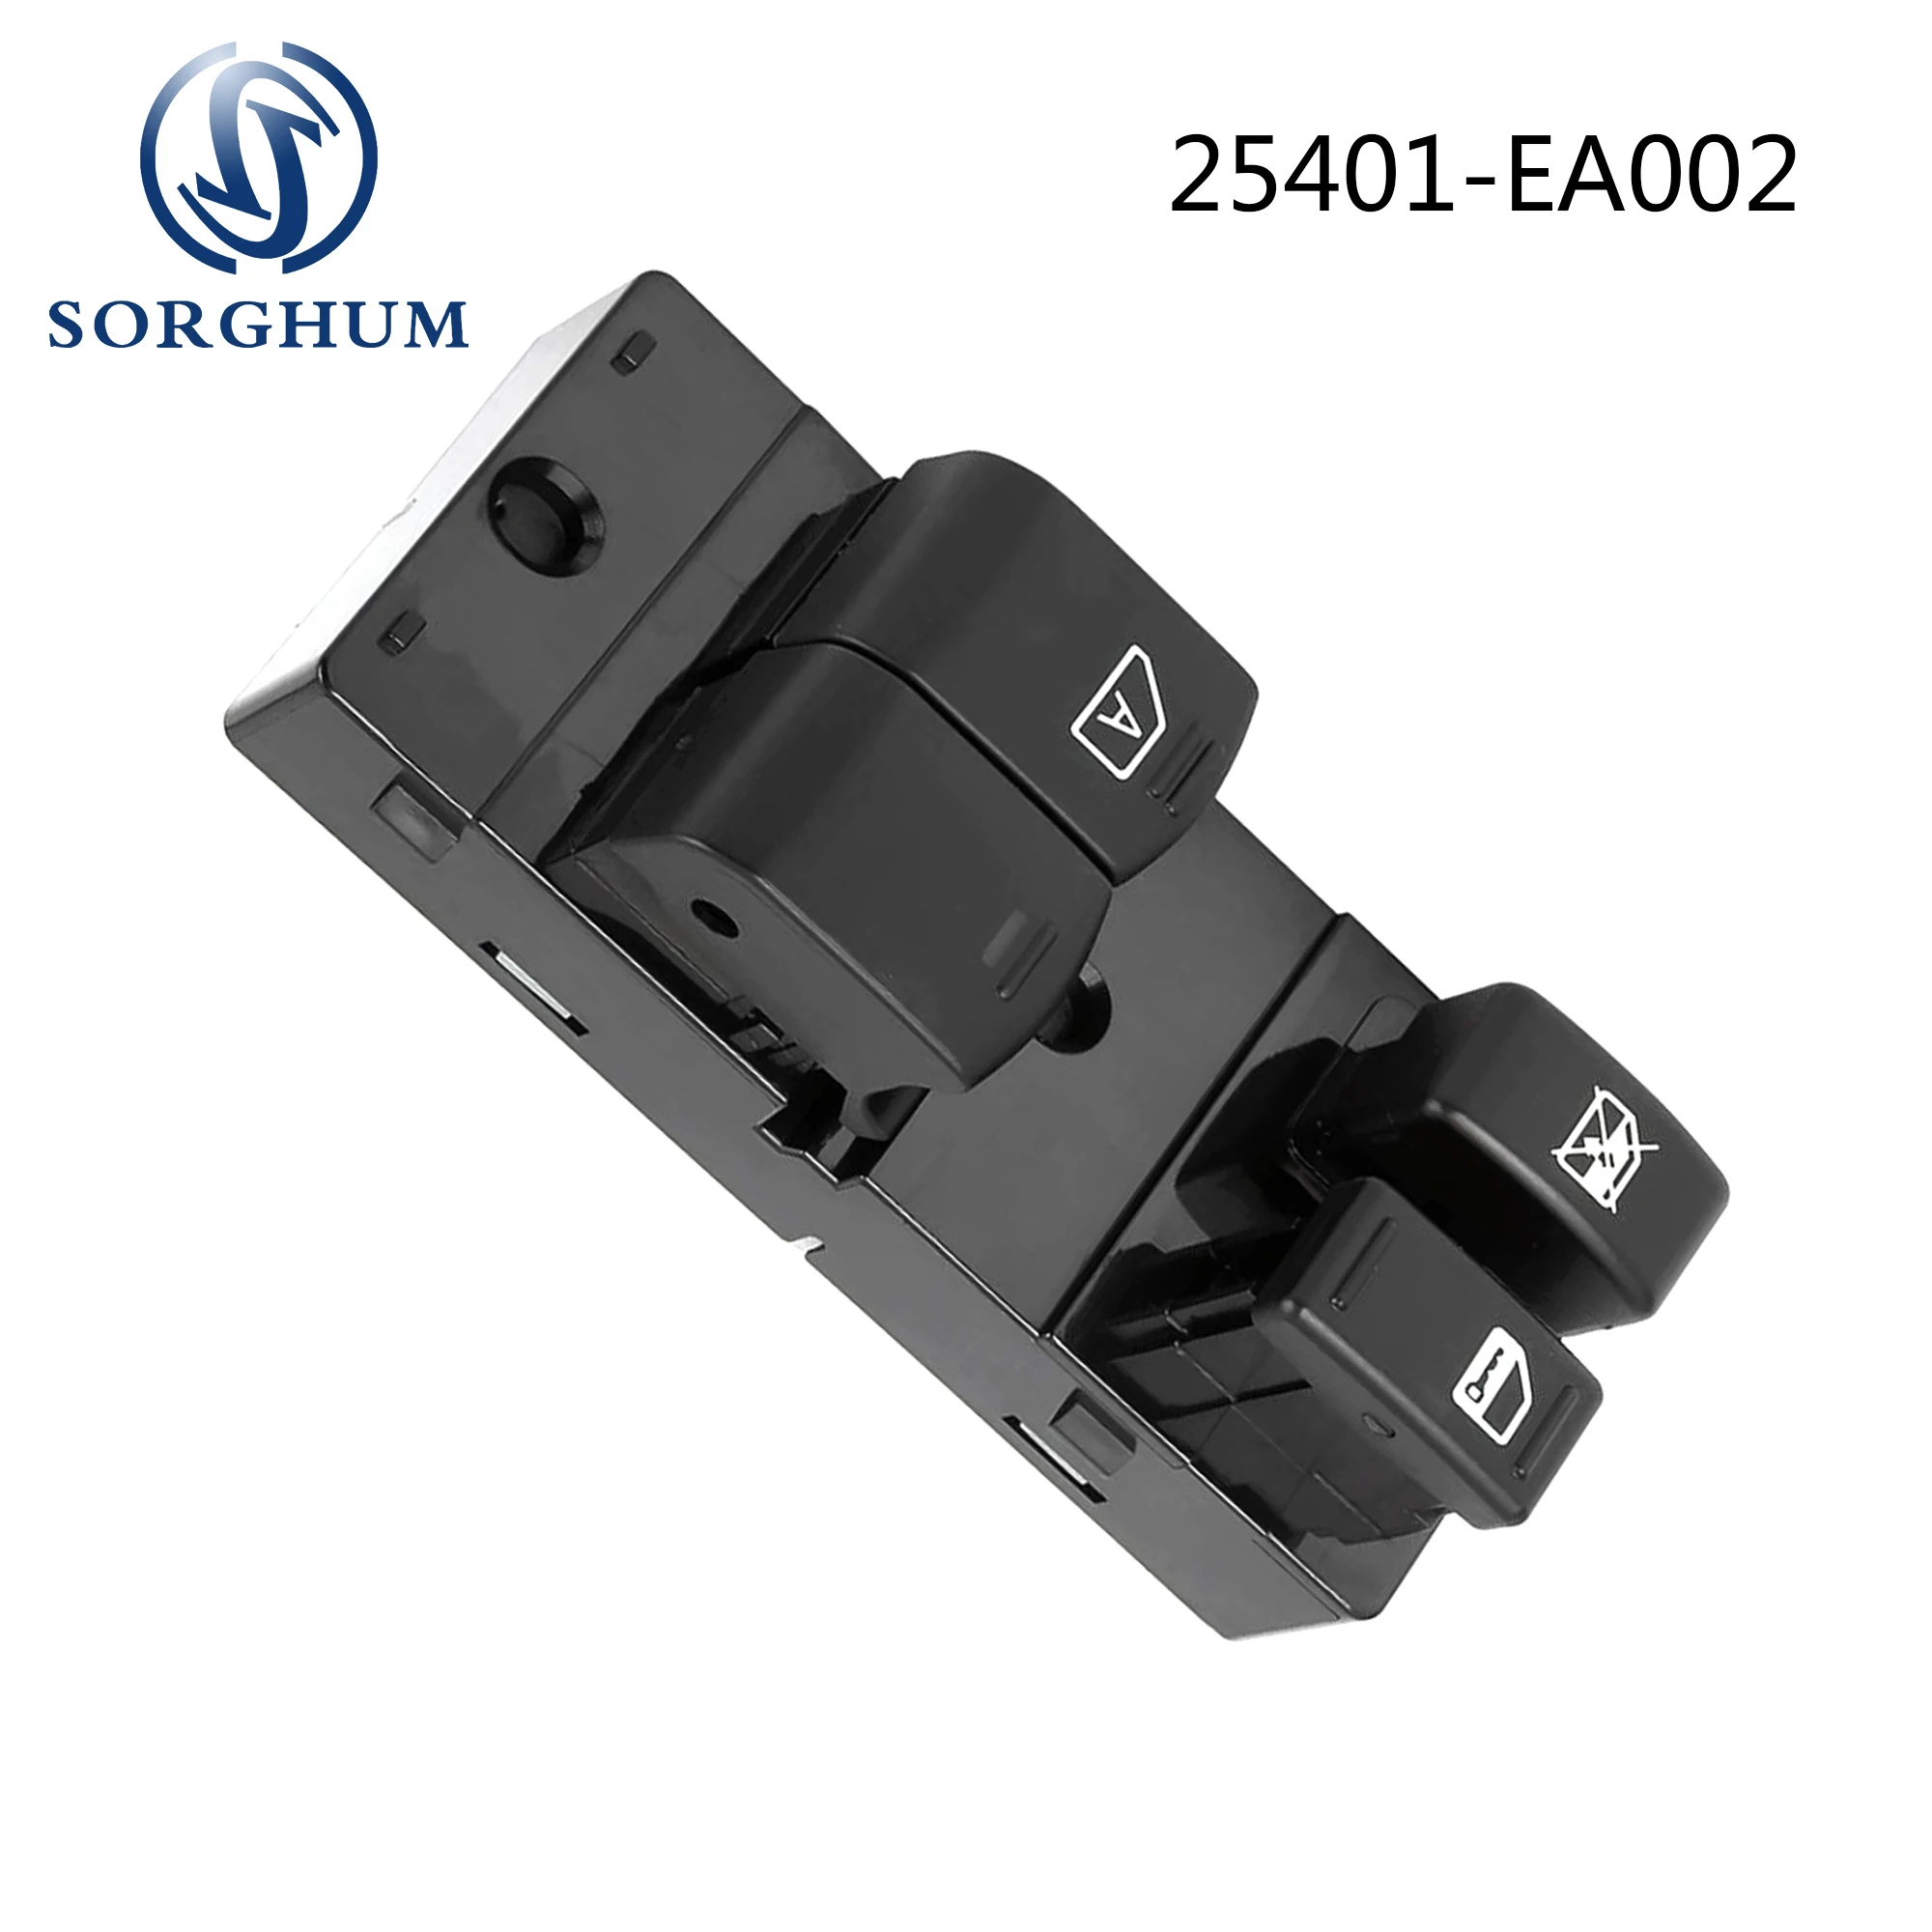 

Sorghum Front Left Driver Side Eletric Master Power Window Switch For 2005-2007 Nissan Frontier Altima Coupe 25401-EA002 SW11410